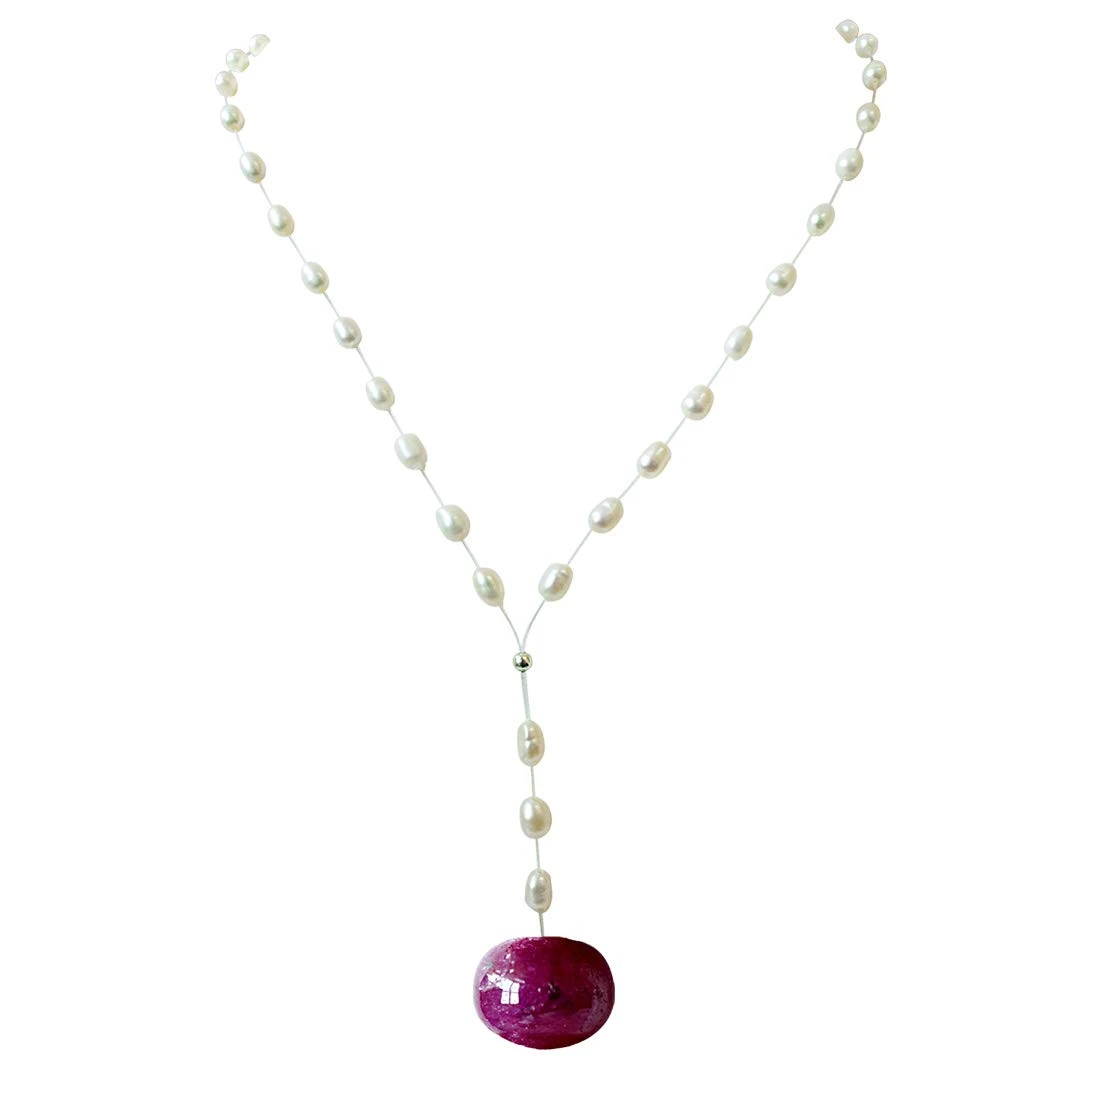 16.39cts Real Natural Round Red Ruby and Freshwater Pearl Wire Style Necklace for Women (SN948)